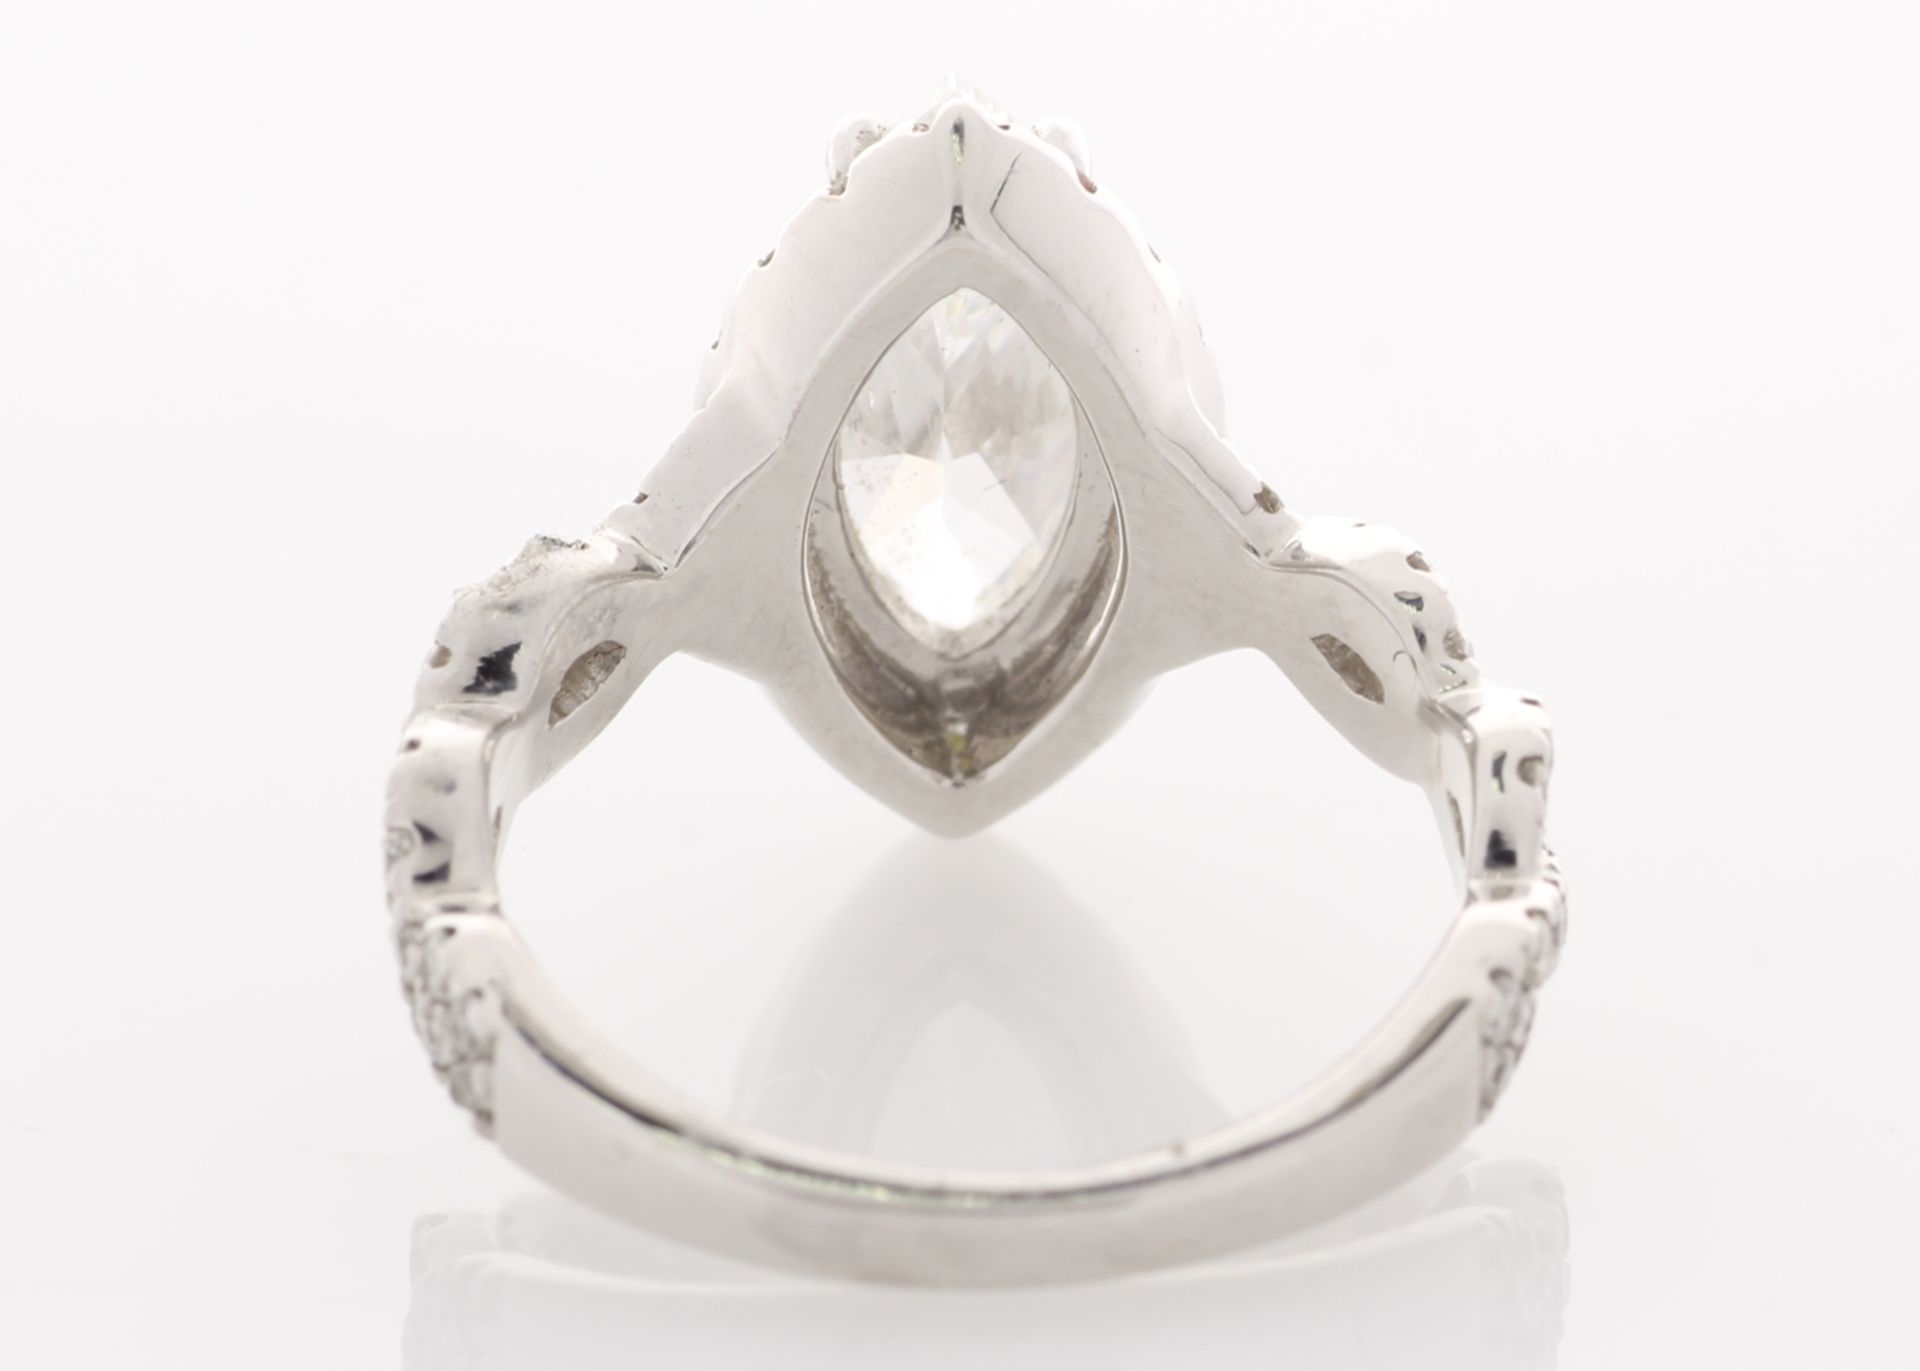 18ct White Gold Marquise Halo Diamond Ring 2.02 Carats - Image 4 of 5